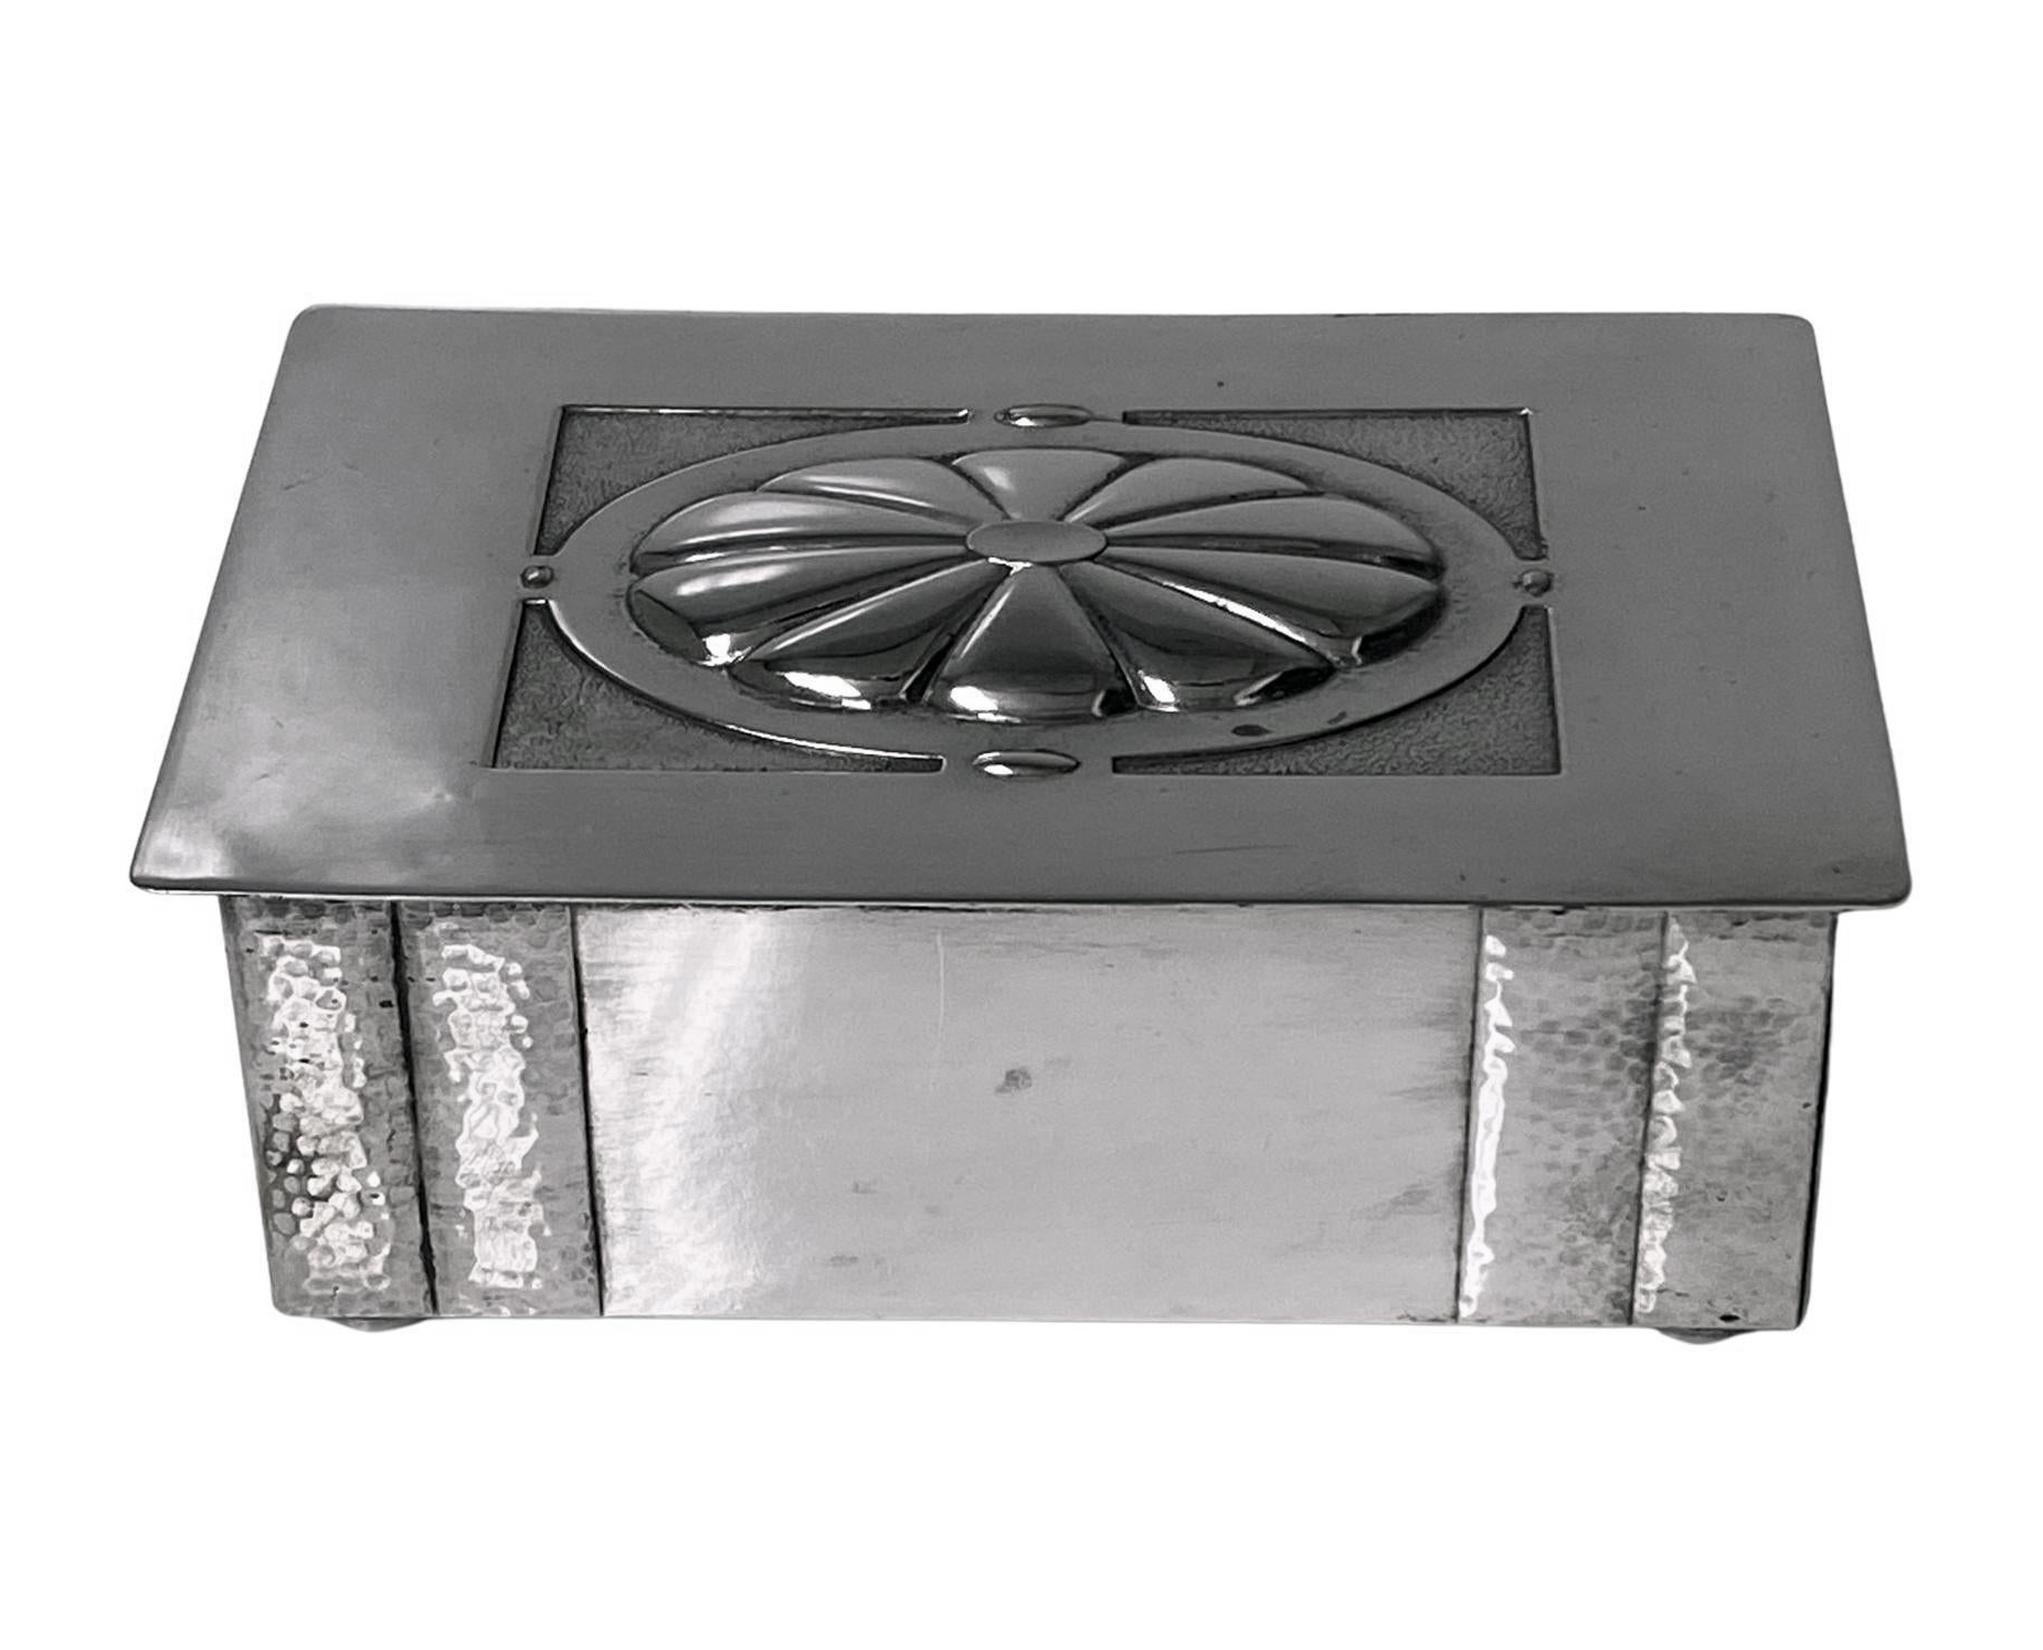 WMF Jugendstil silver plate Cigarette or Jewellery Box C.1920. The box on four bun feet, rectangular in shape; the cover with oval central slightly raised lobate panel with stippled background. The sides plain with hammered finish double panel